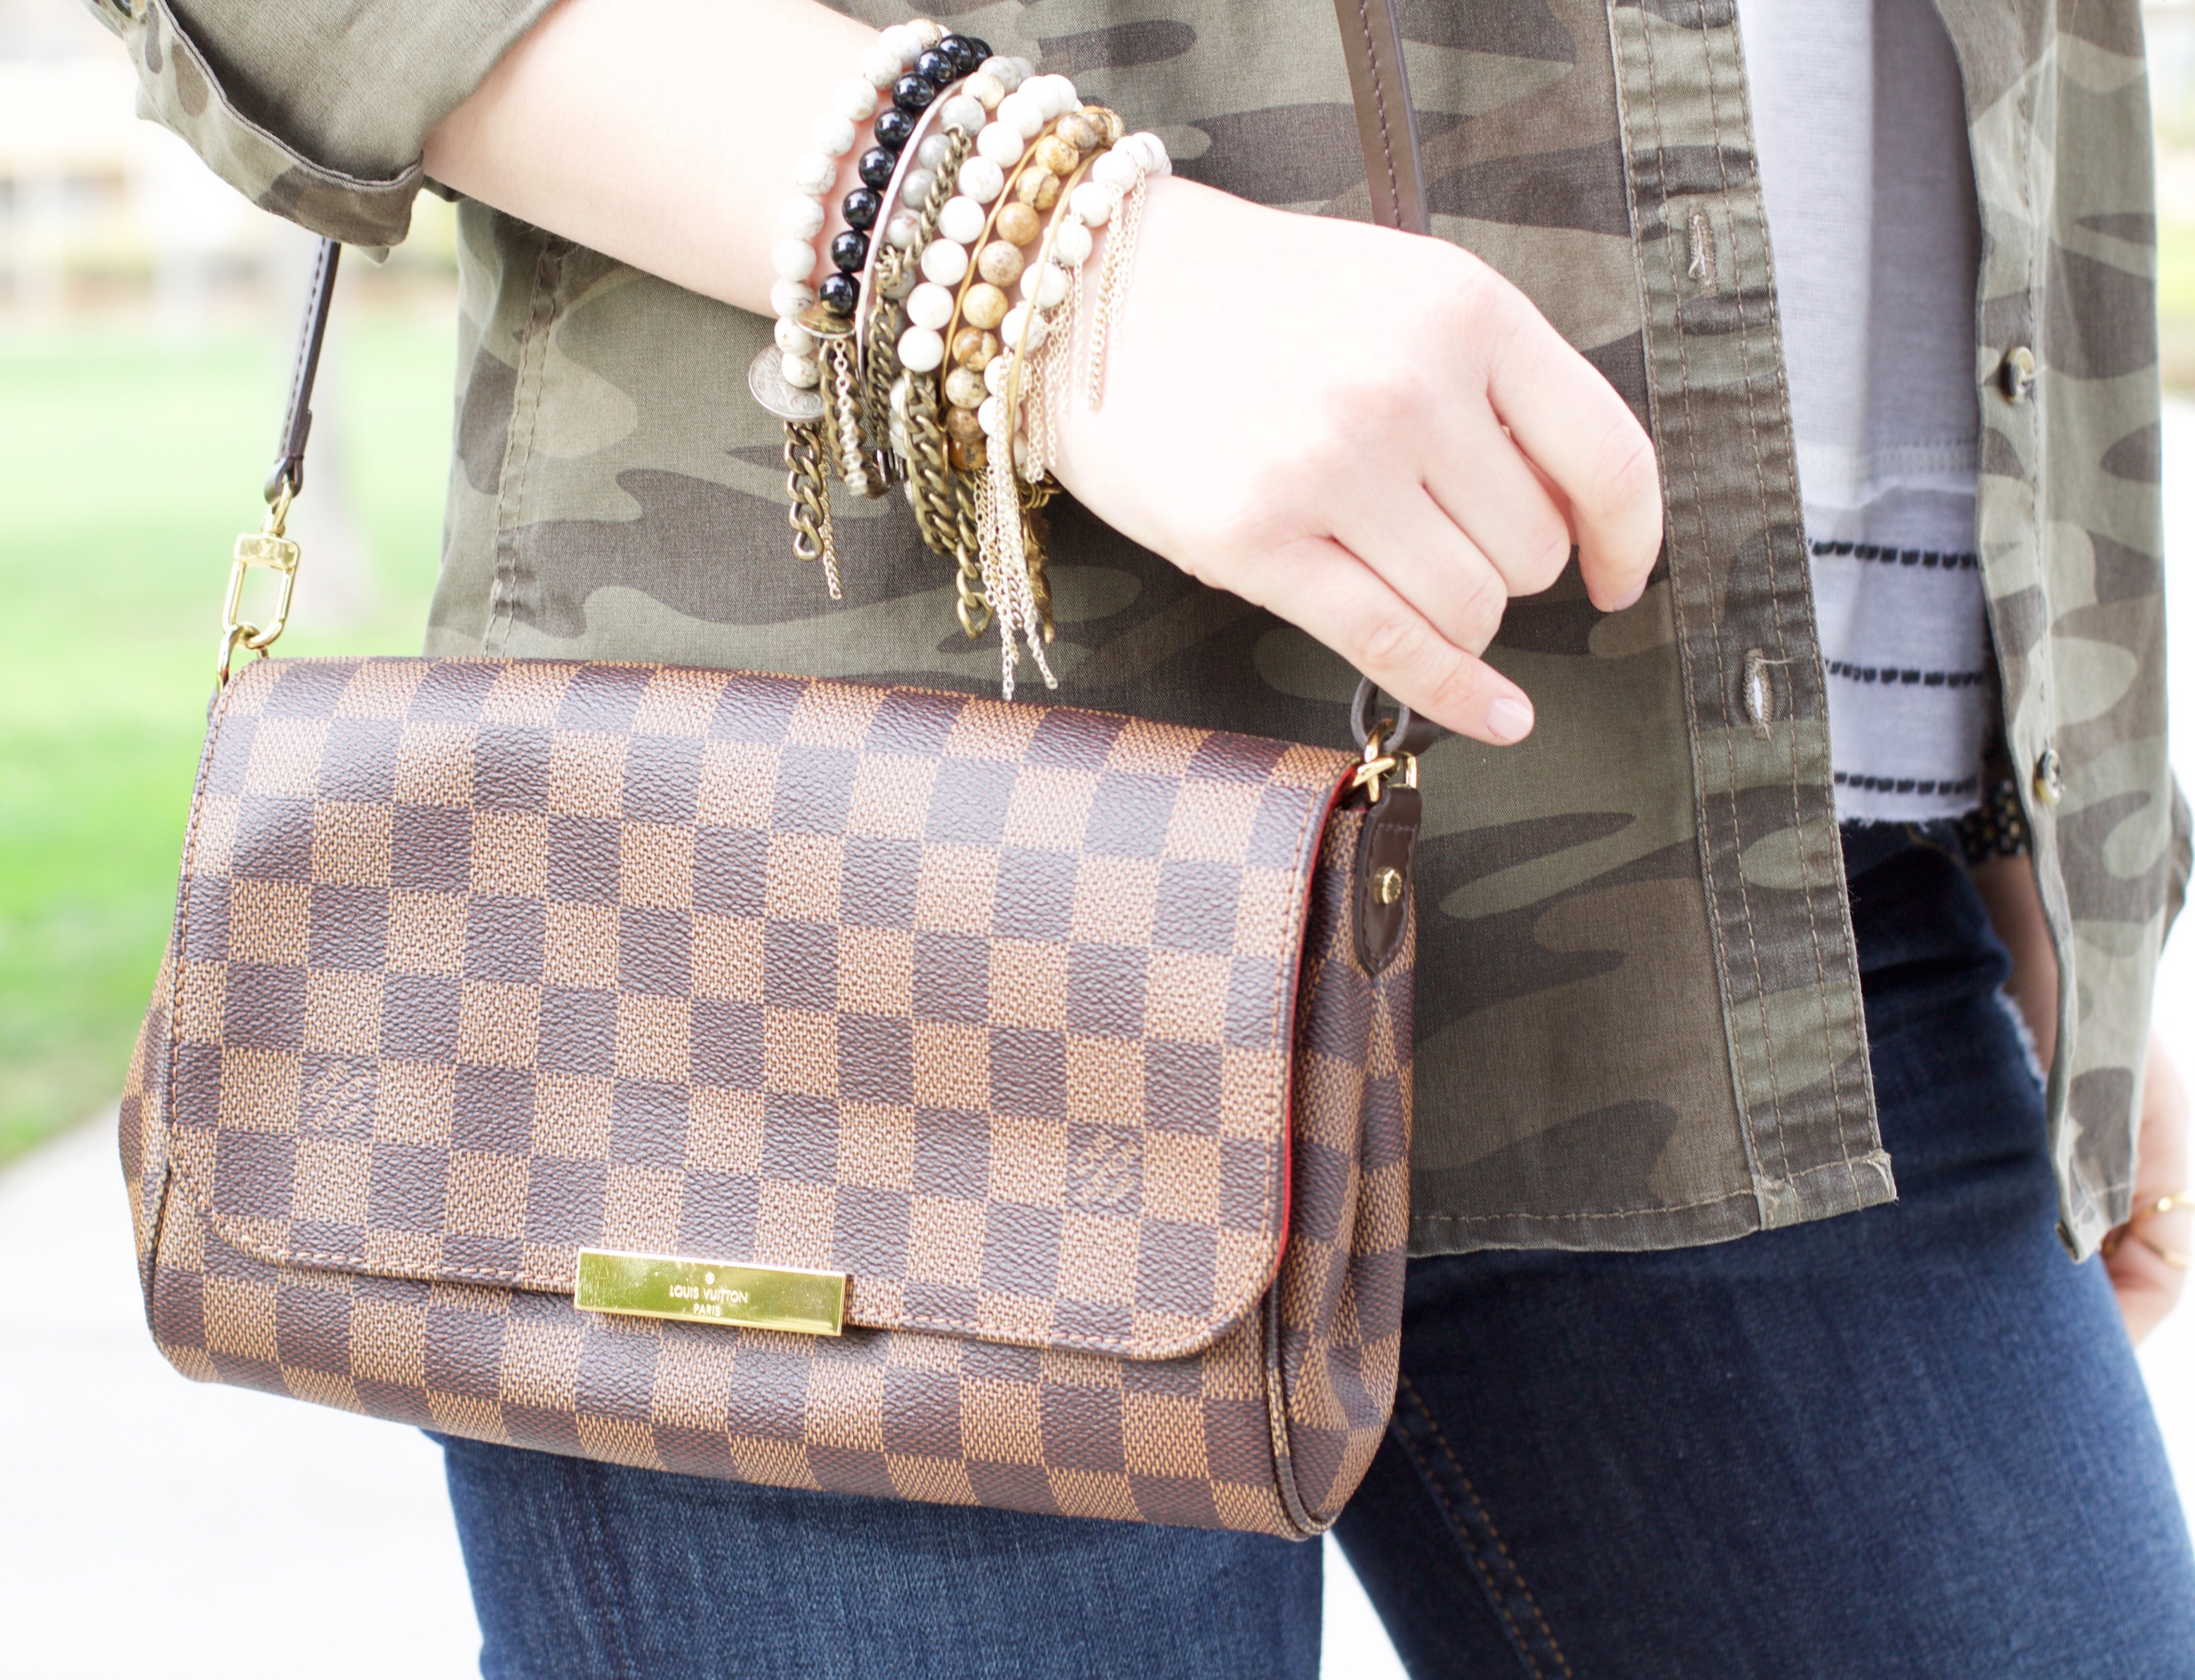 Camo Jacket - My Styled Life  Louis vuitton, Louis vuitton handbags, Louis  vuitton favorite mm